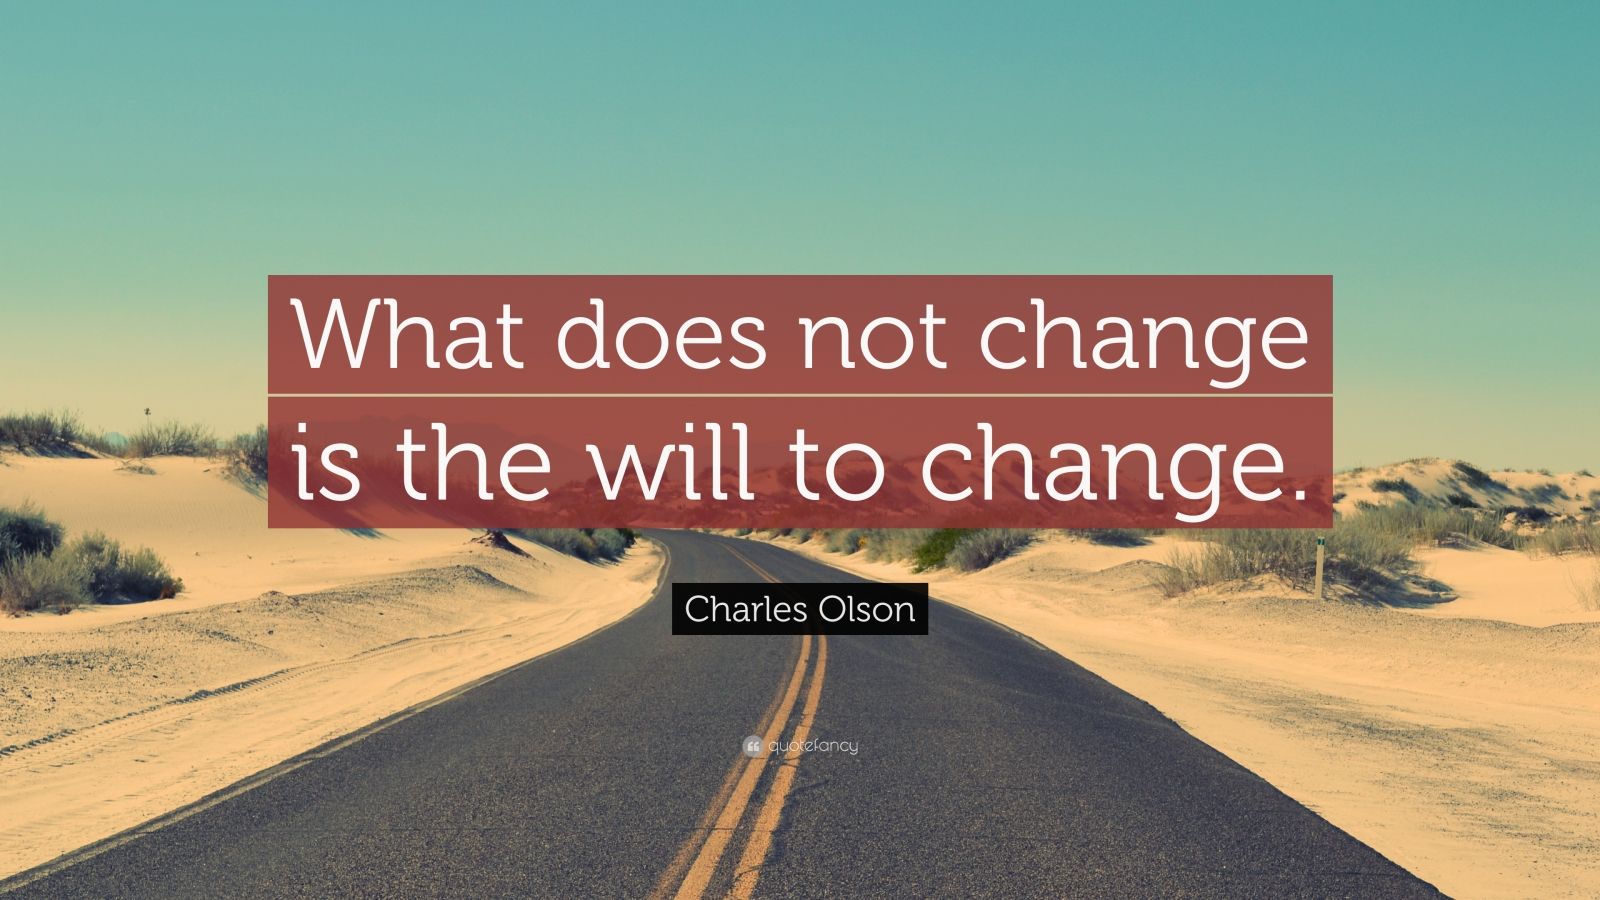 Charles Olson Quote: “What does not change is the will to change.” (7 ...